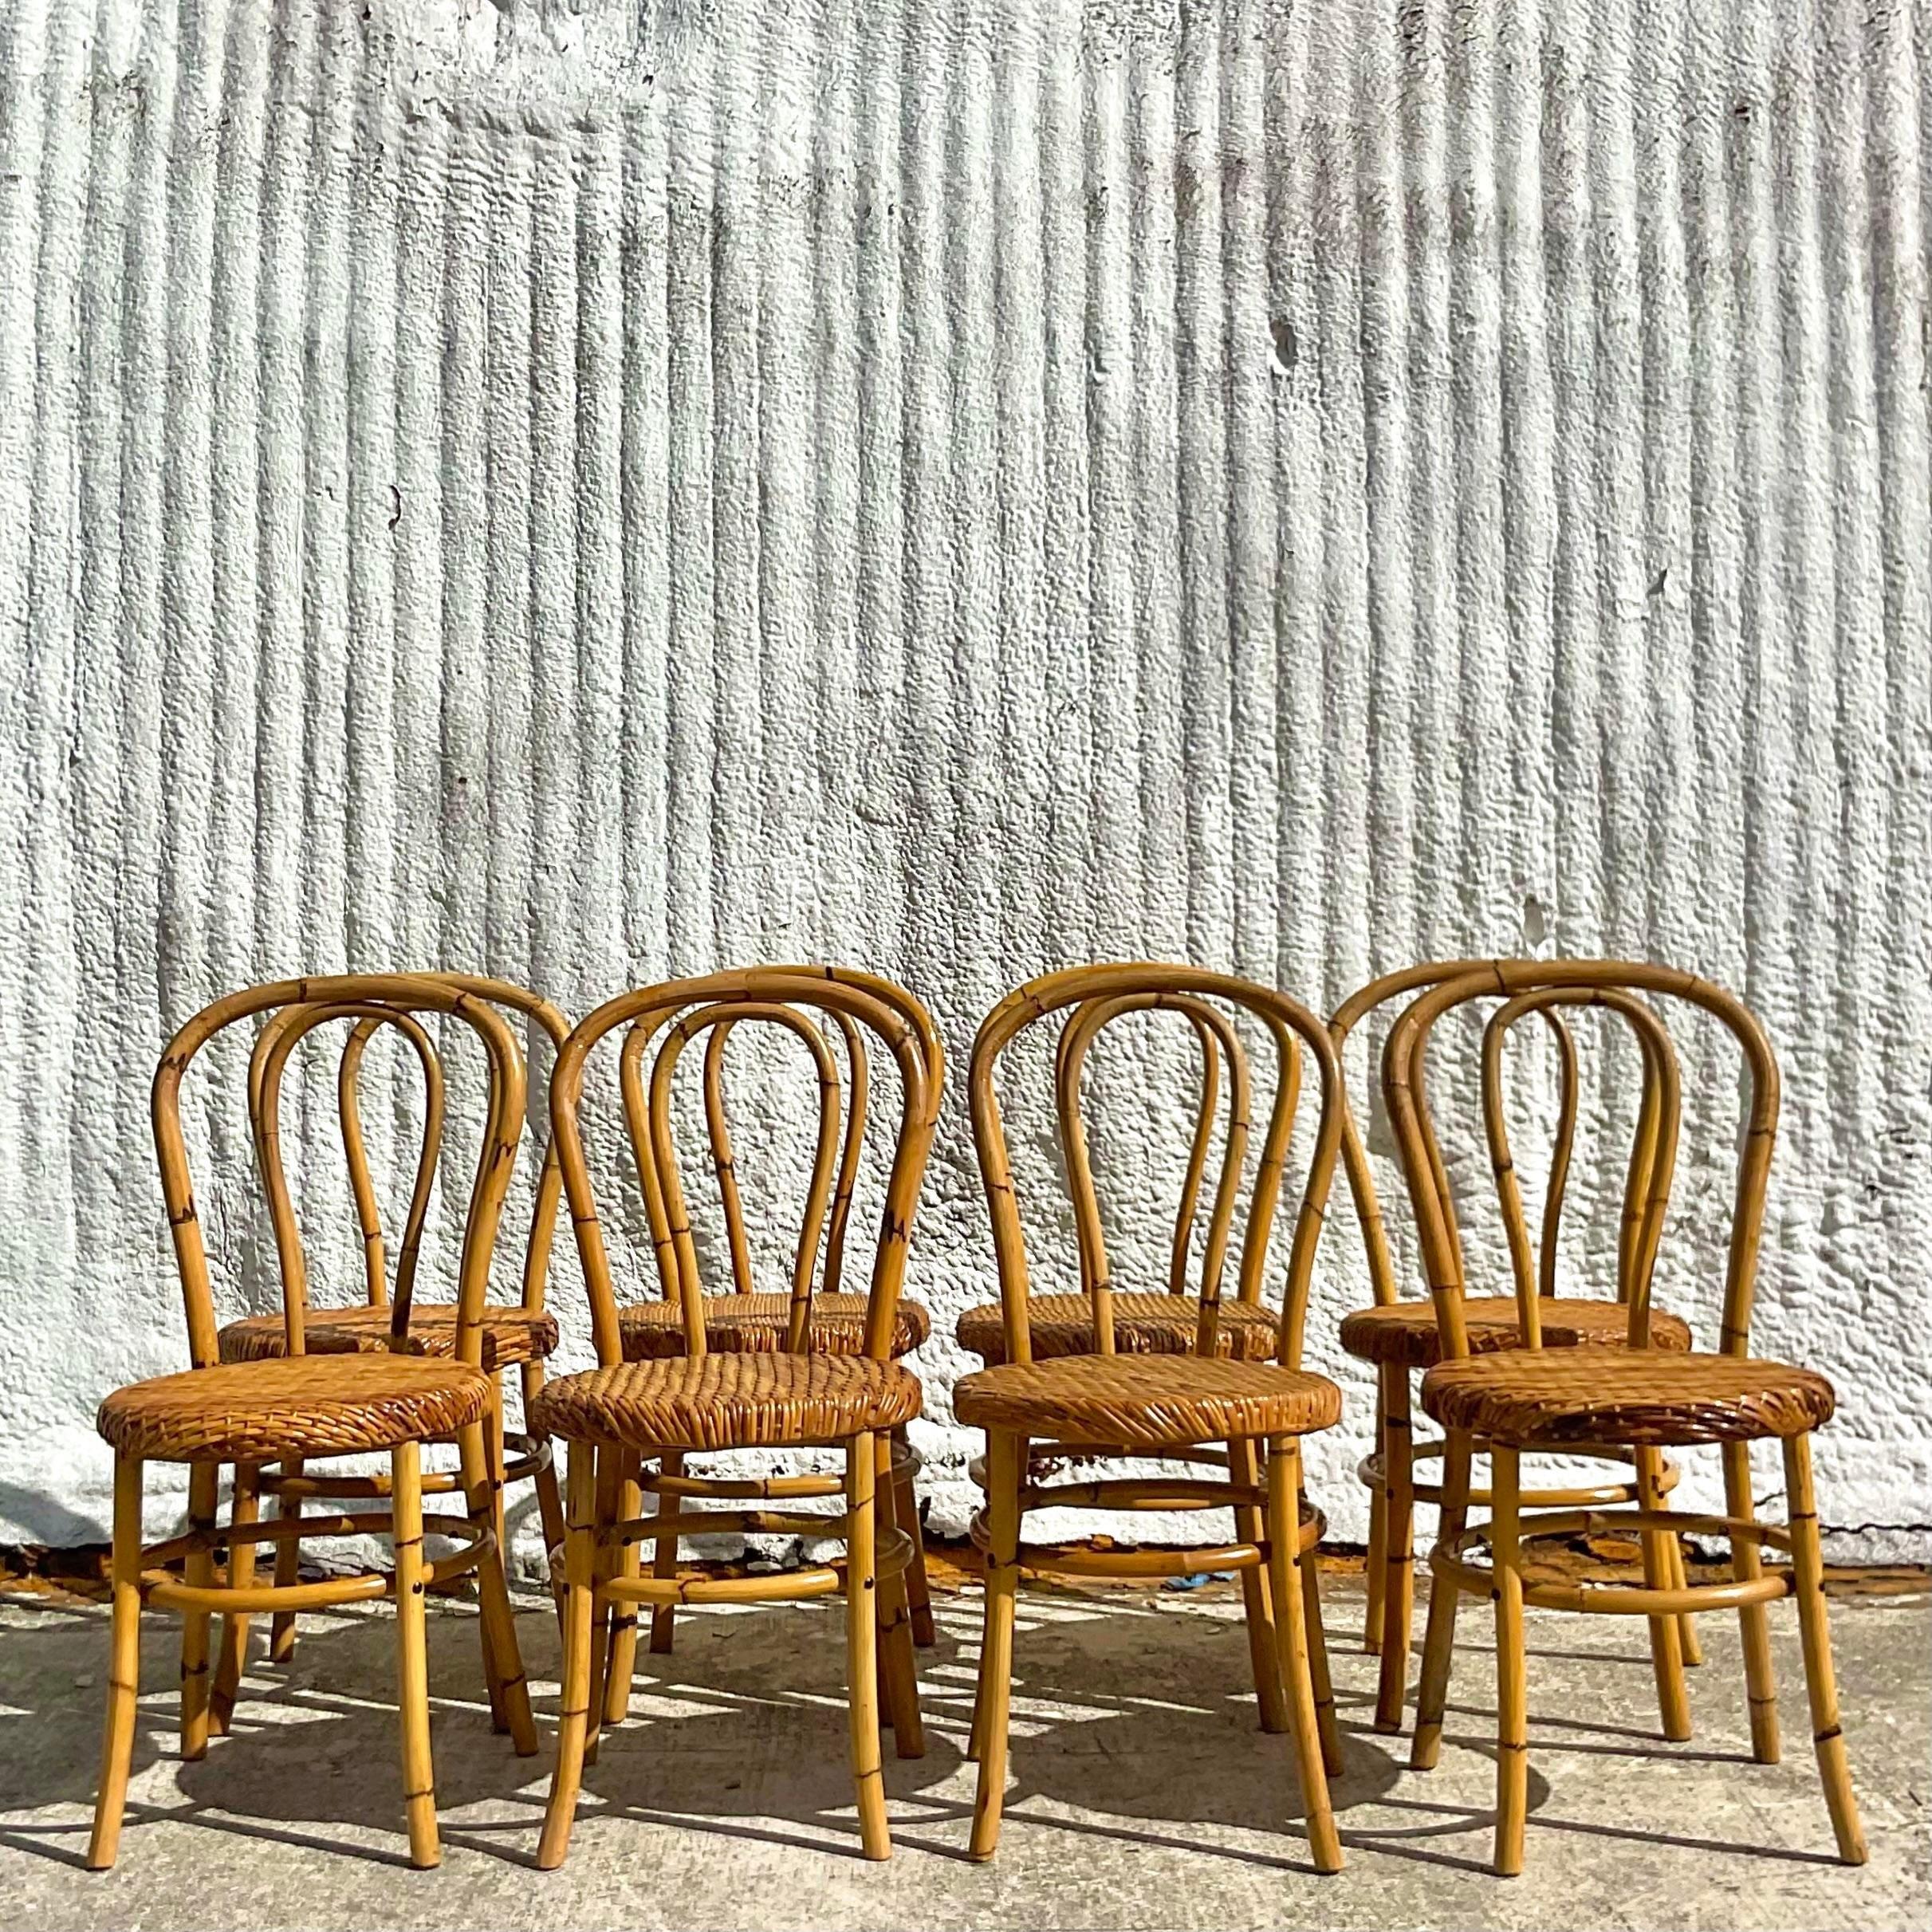 Vintage Coastal Rare McGuire Bent Bamboo Dining Chairs - Set of 8 For Sale 2